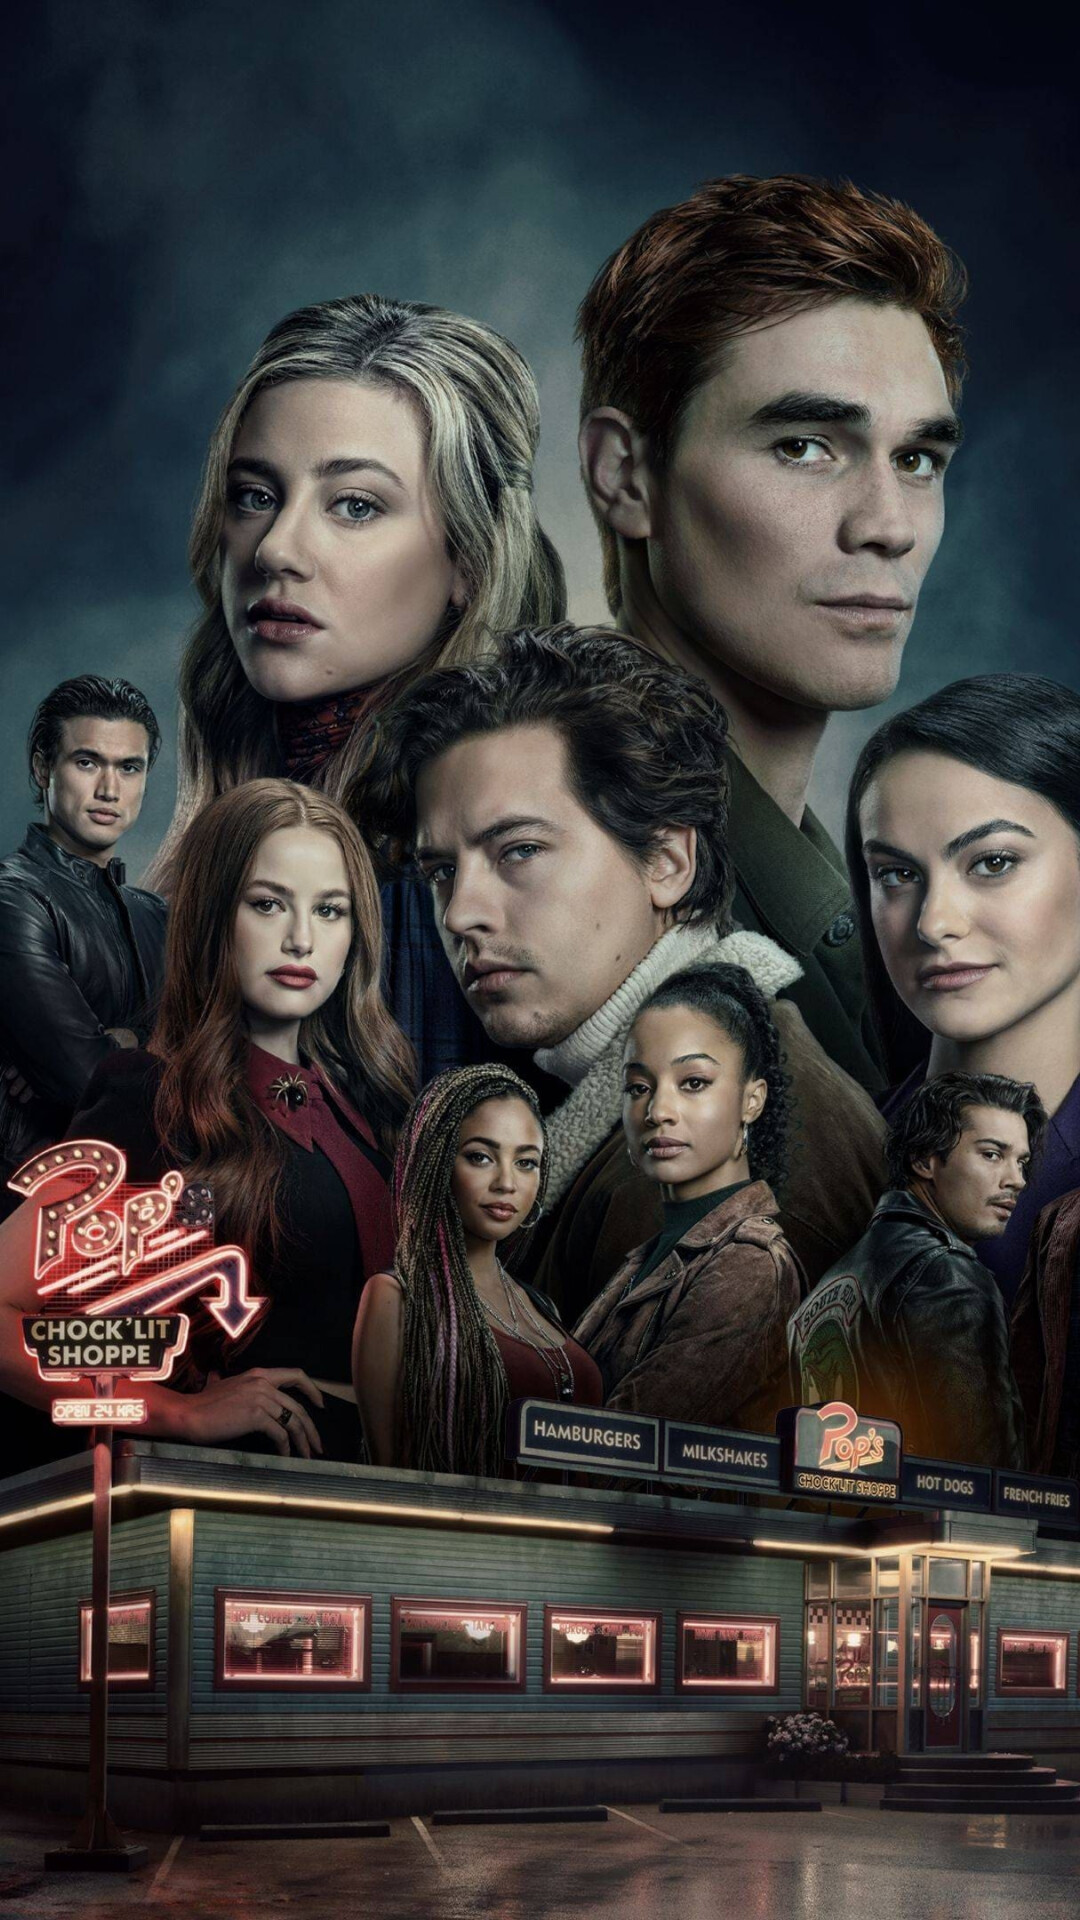 Riverdale (TV Series): An American teen drama based on the characters of Archie Comics, Pop's. 1080x1920 Full HD Wallpaper.